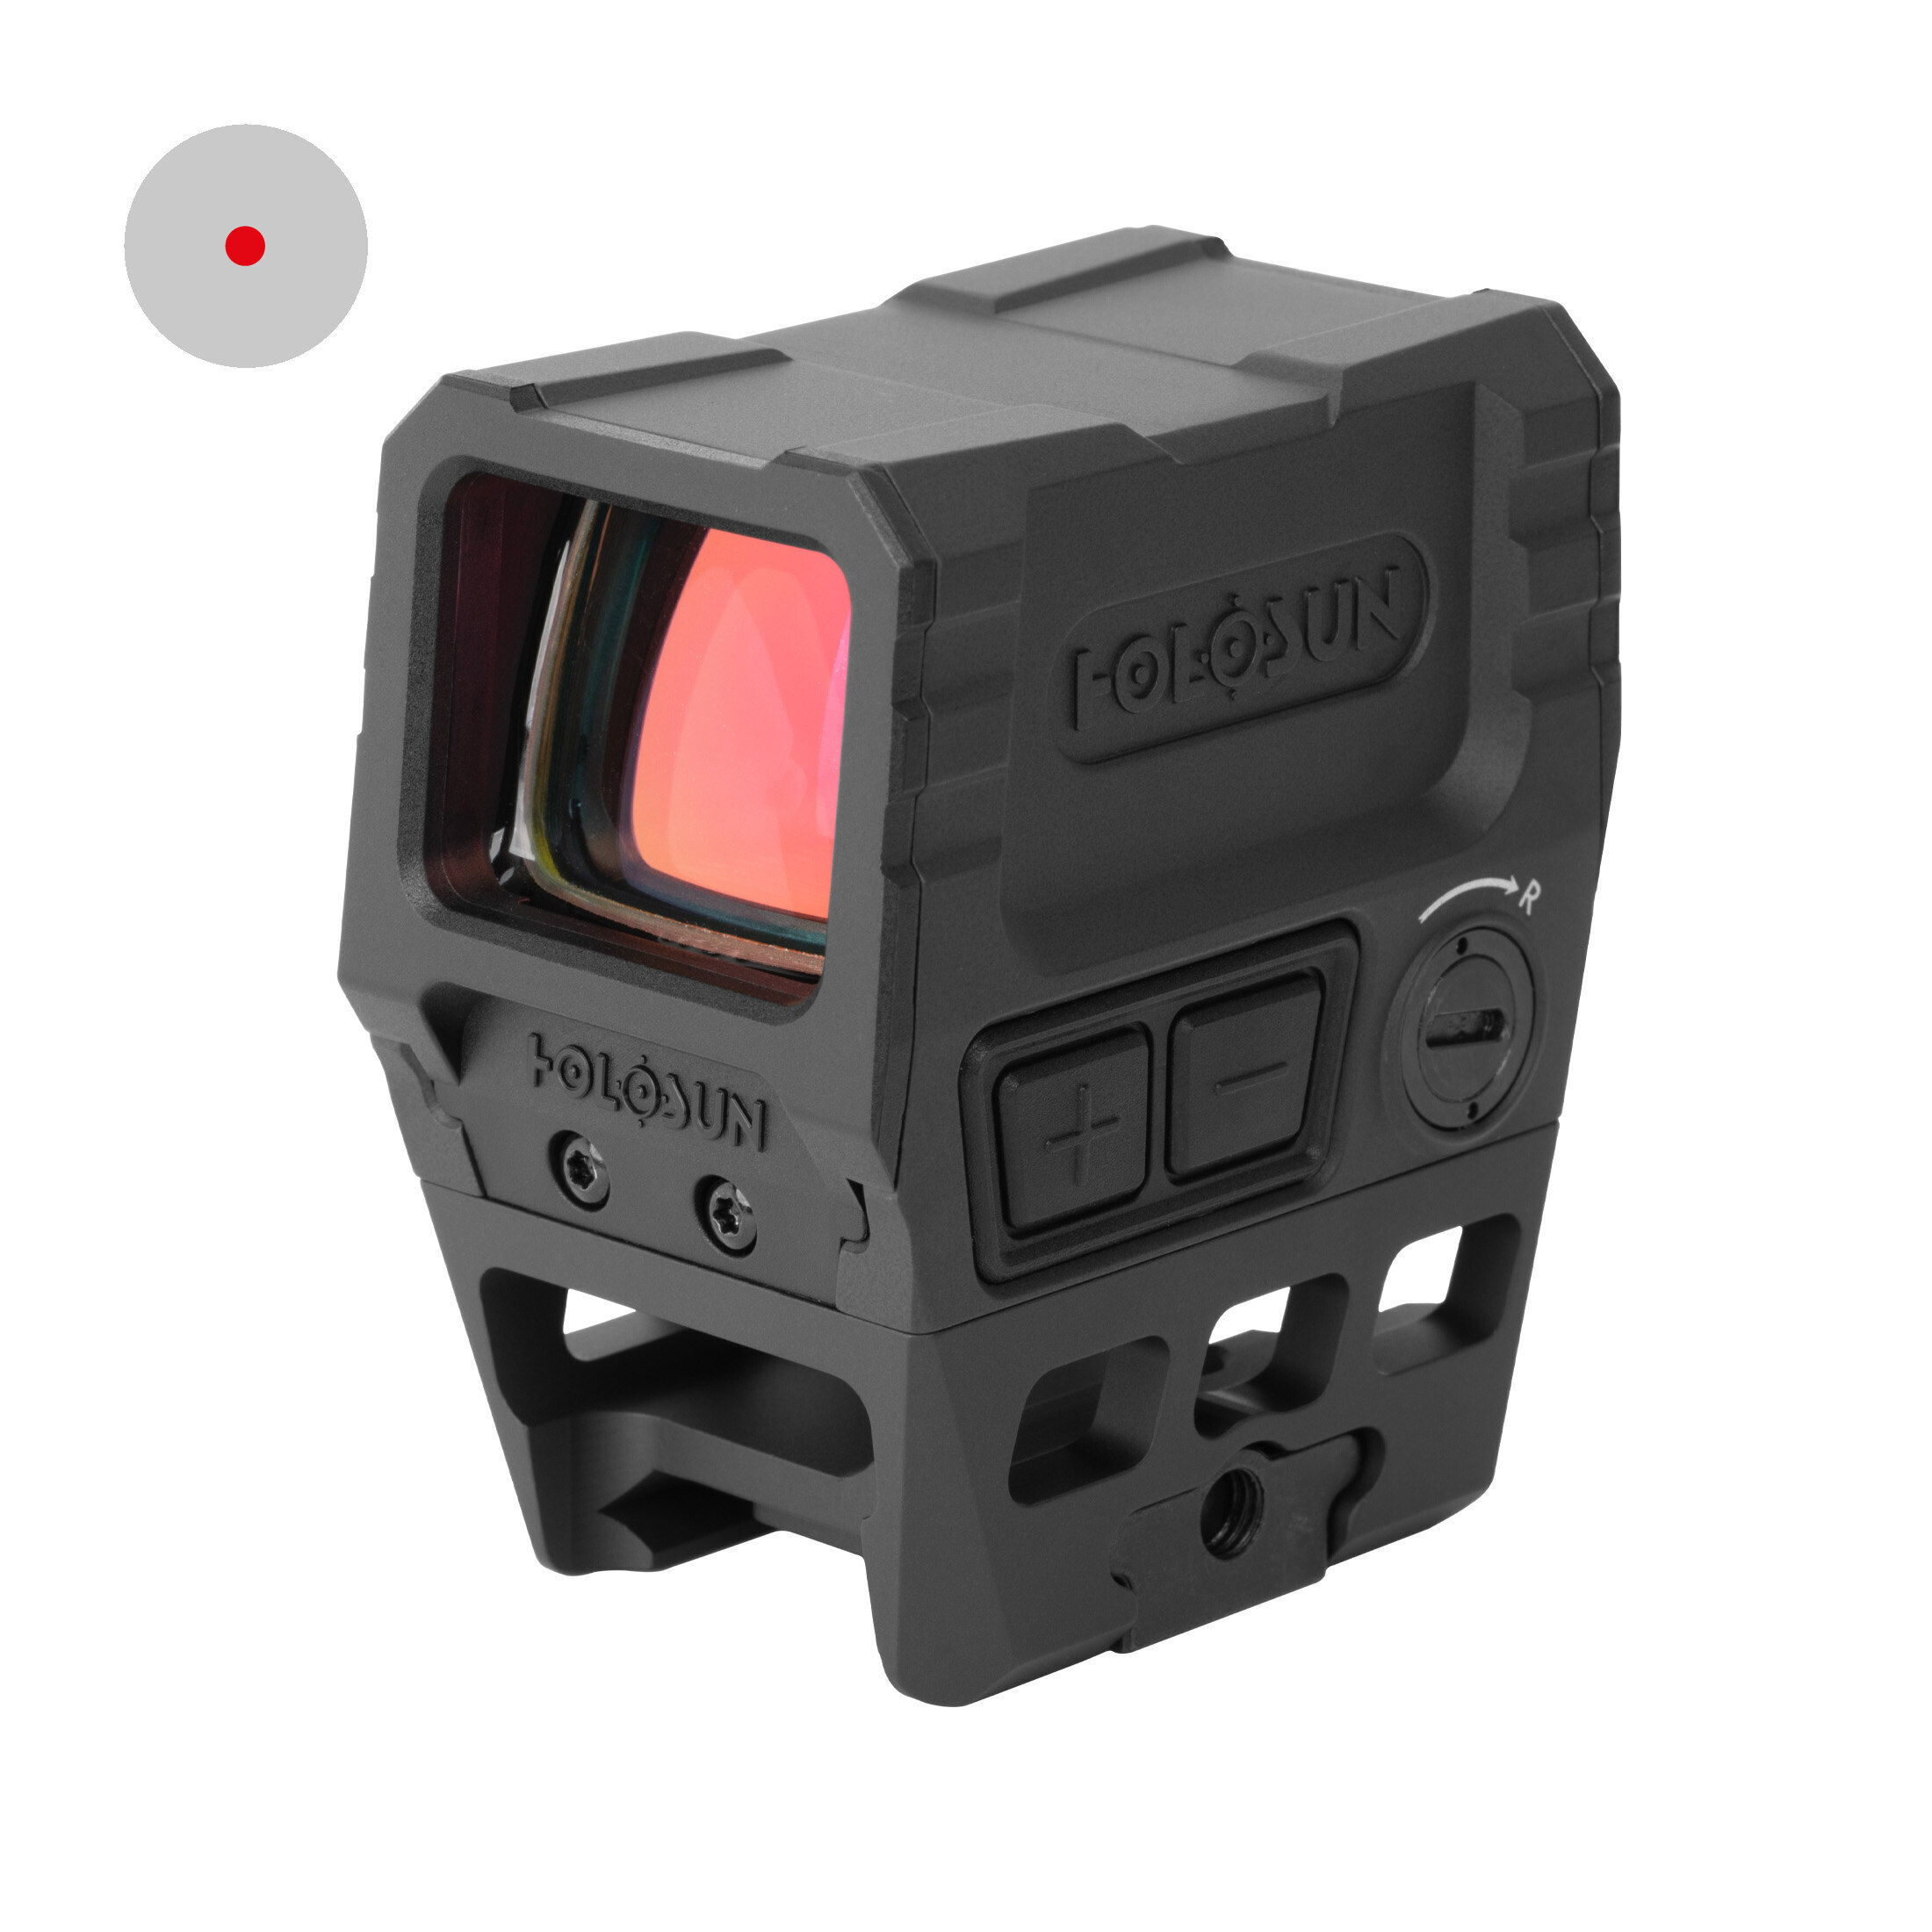 Holosun Classic Reflex Red Dot Sight AEMS-CORE-RD with 2MOA reticle and aluminium housing